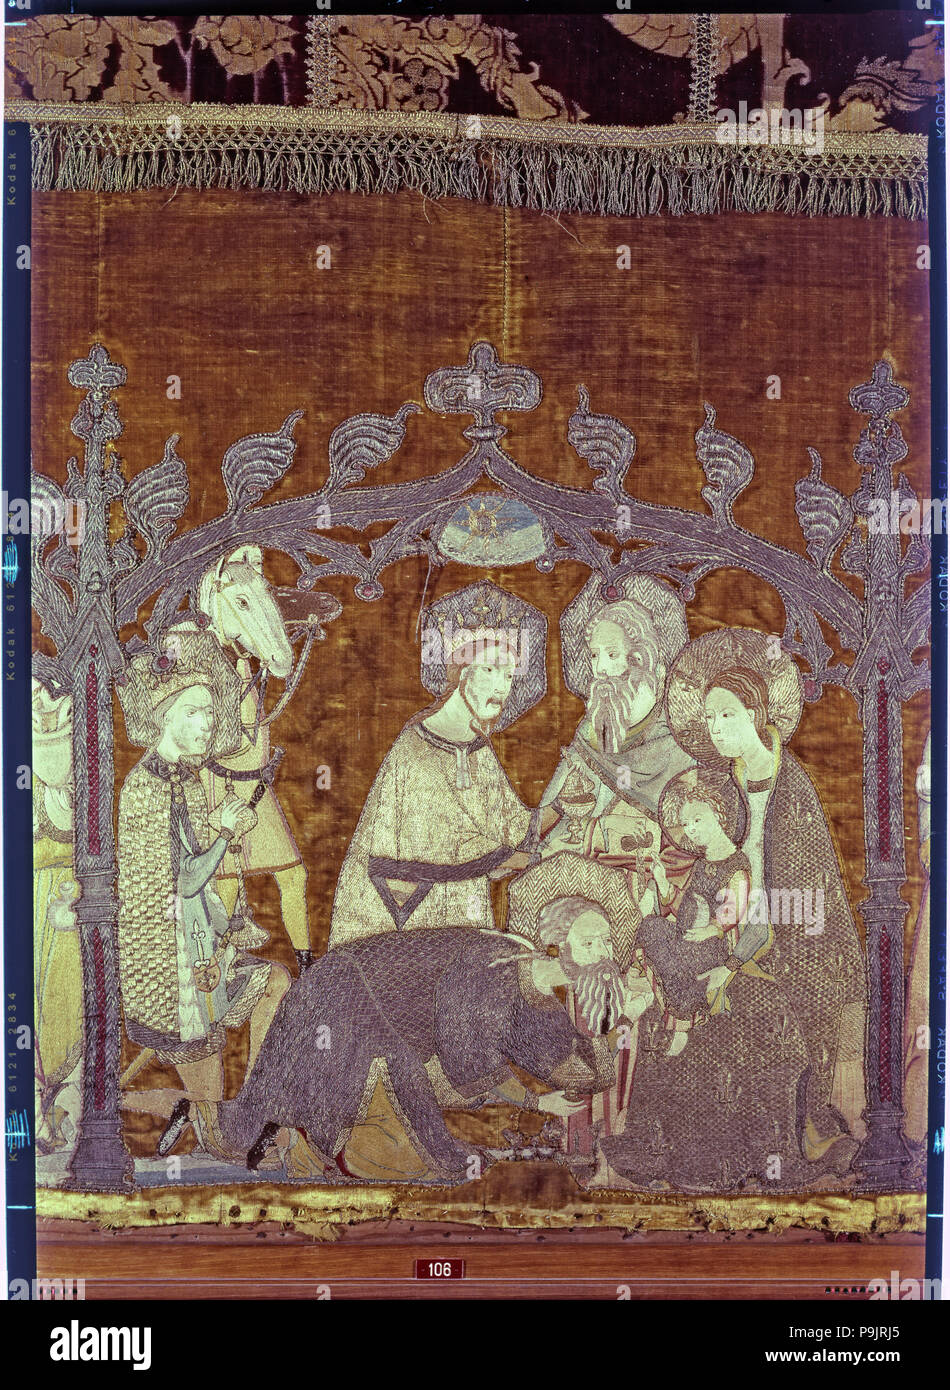 Adoration of the Magi, embroidered on a cloth of gold and silk. Stock Photo